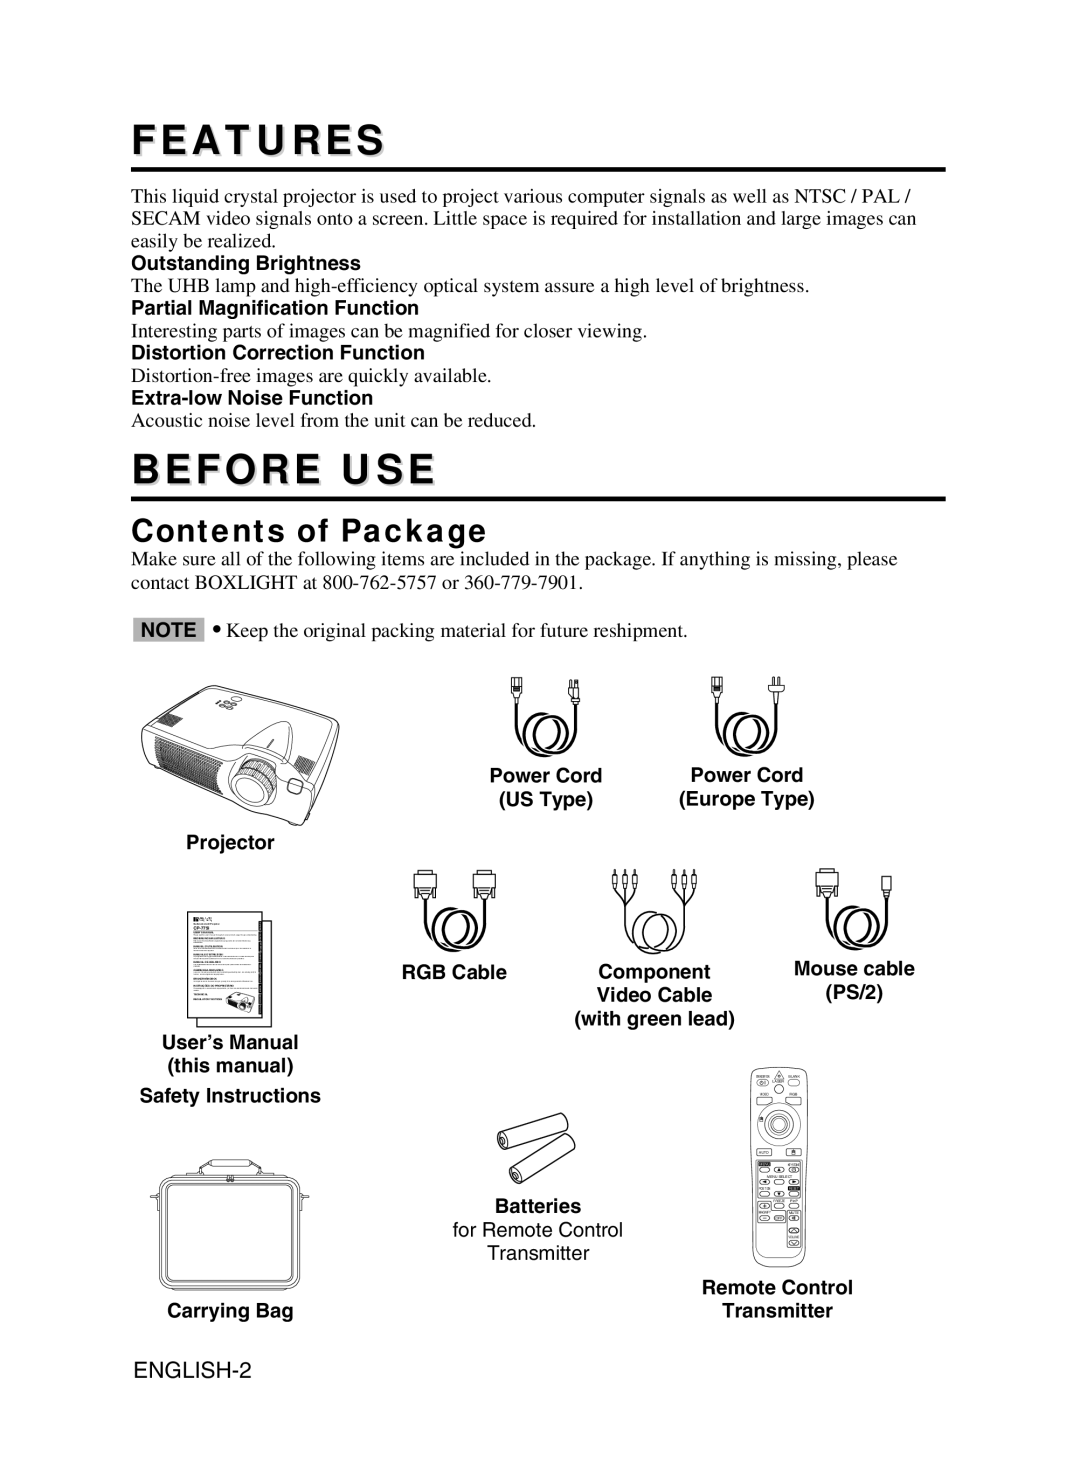 BOXLIGHT CP-775I user manual Features, Before Use, Contents of Package, ENGLISH-2 